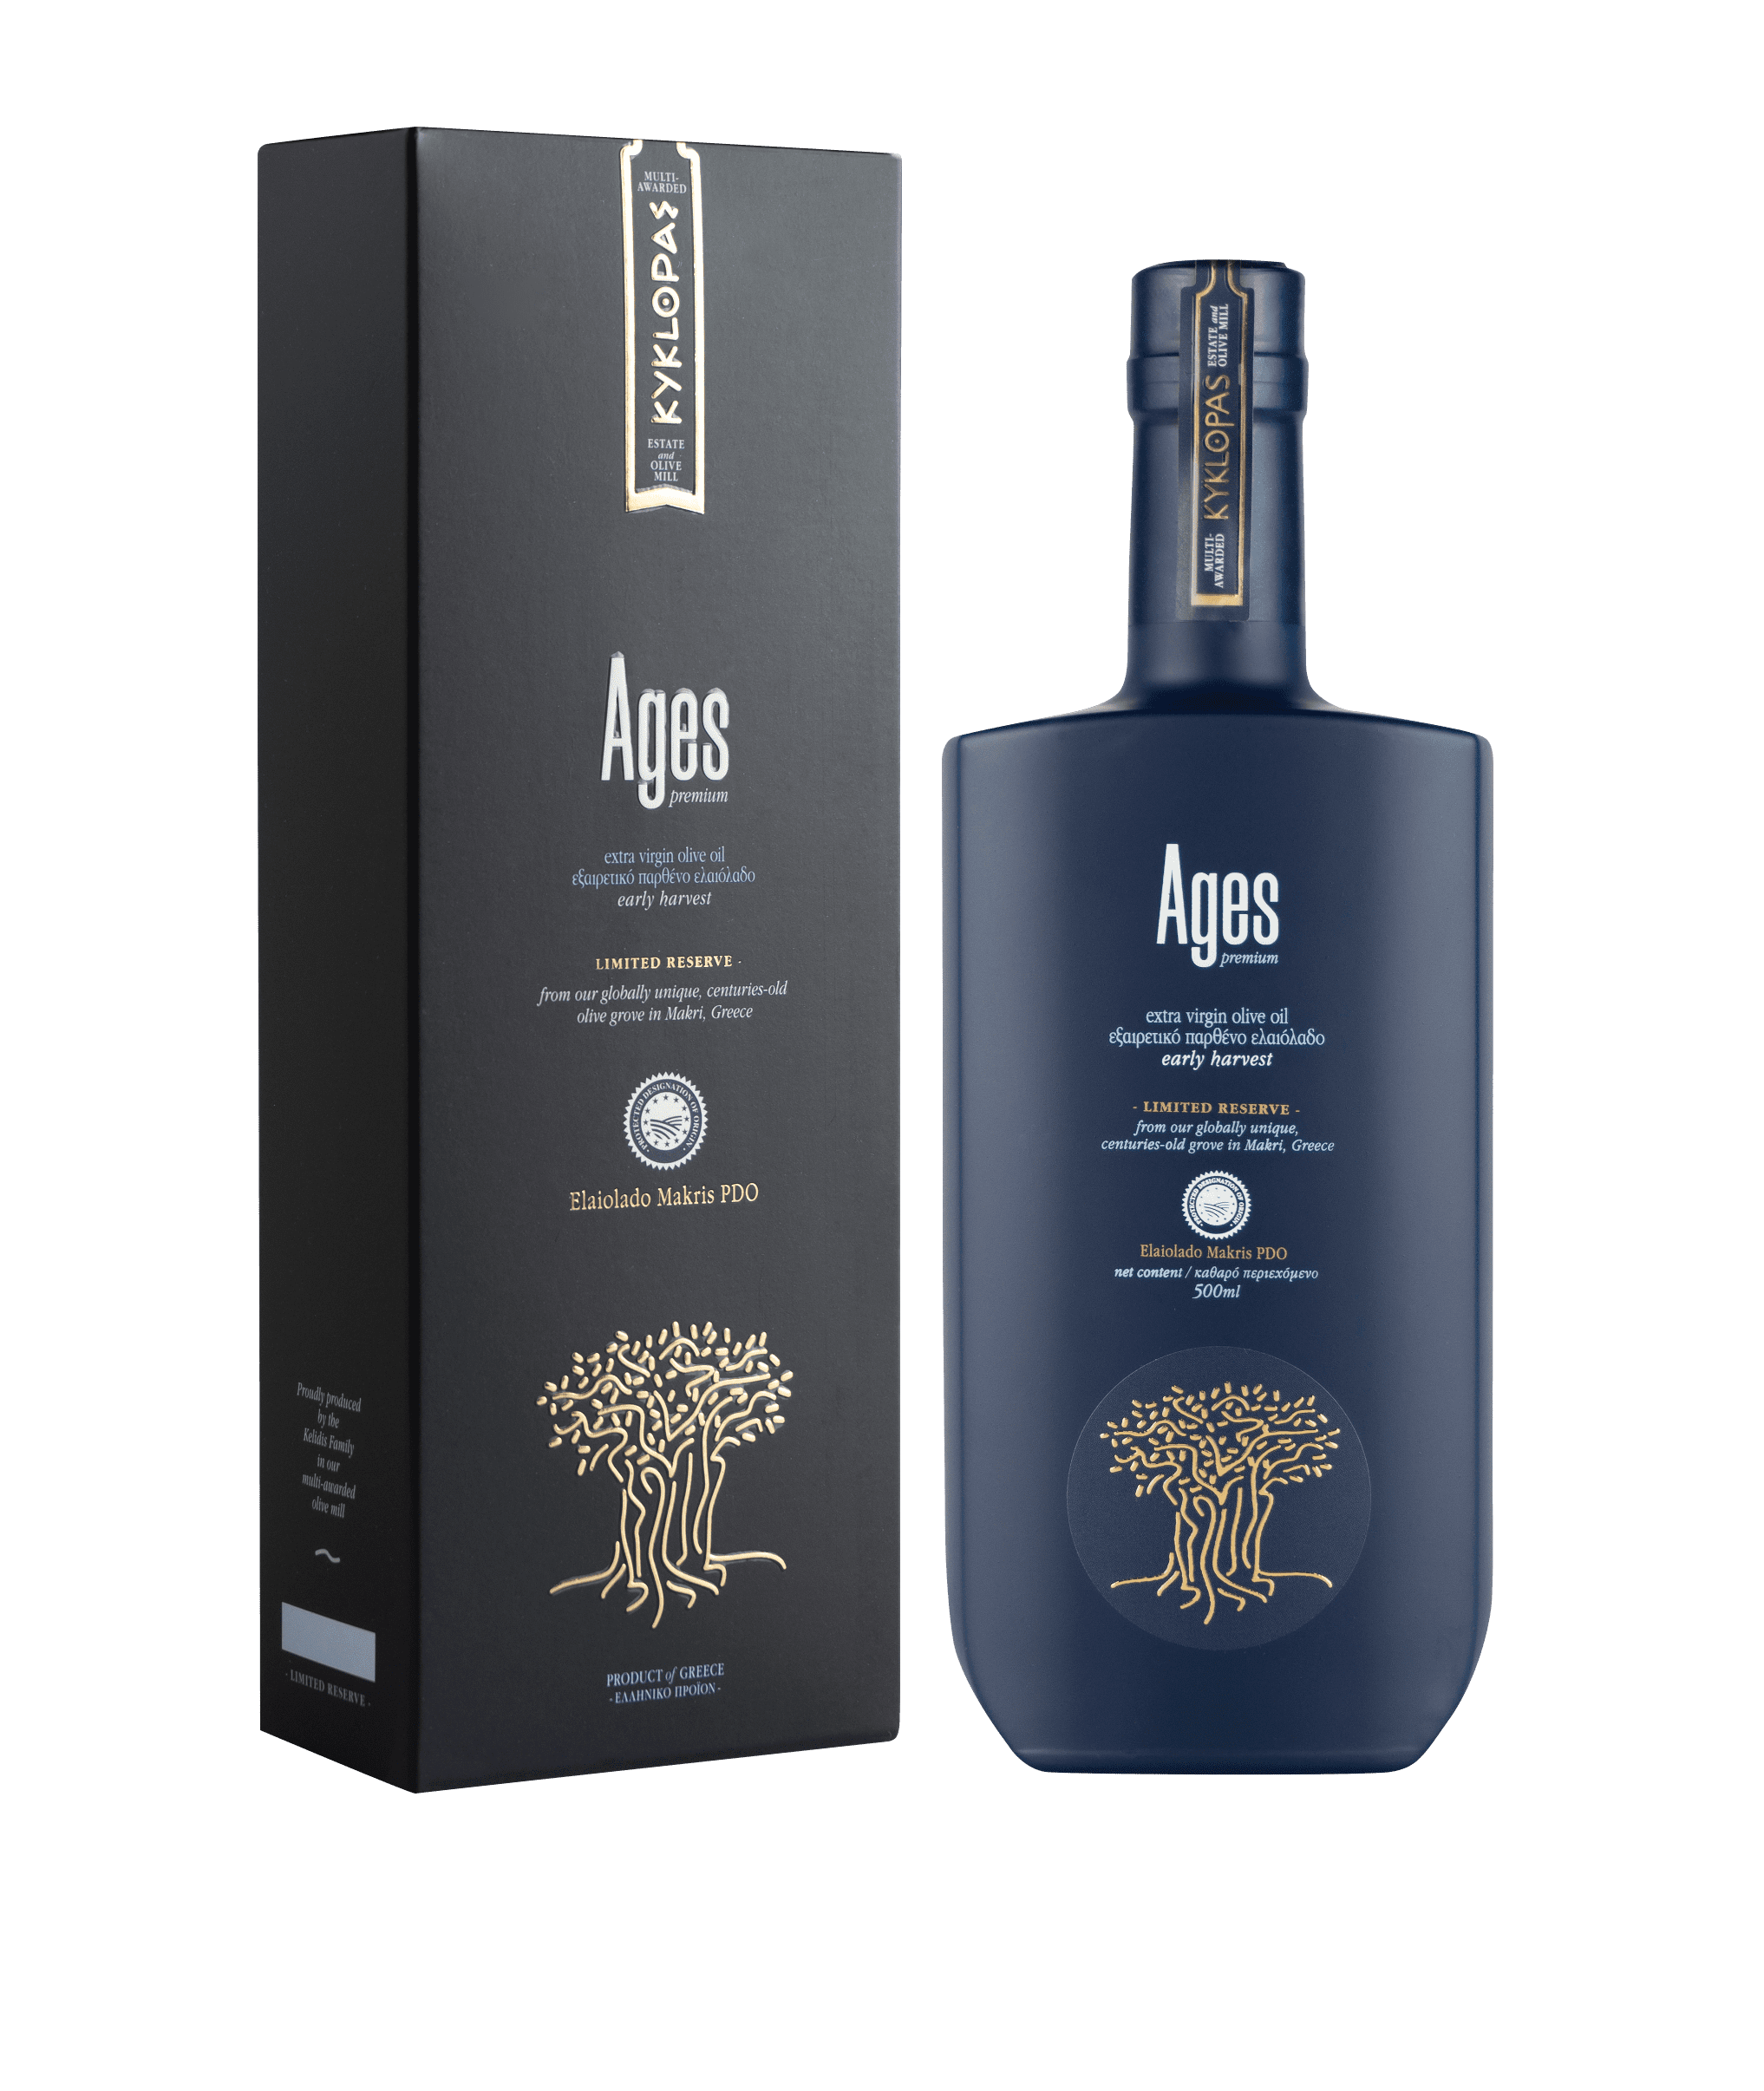 Ages premium Extra Virgin Olive Oil limited Reserve 0